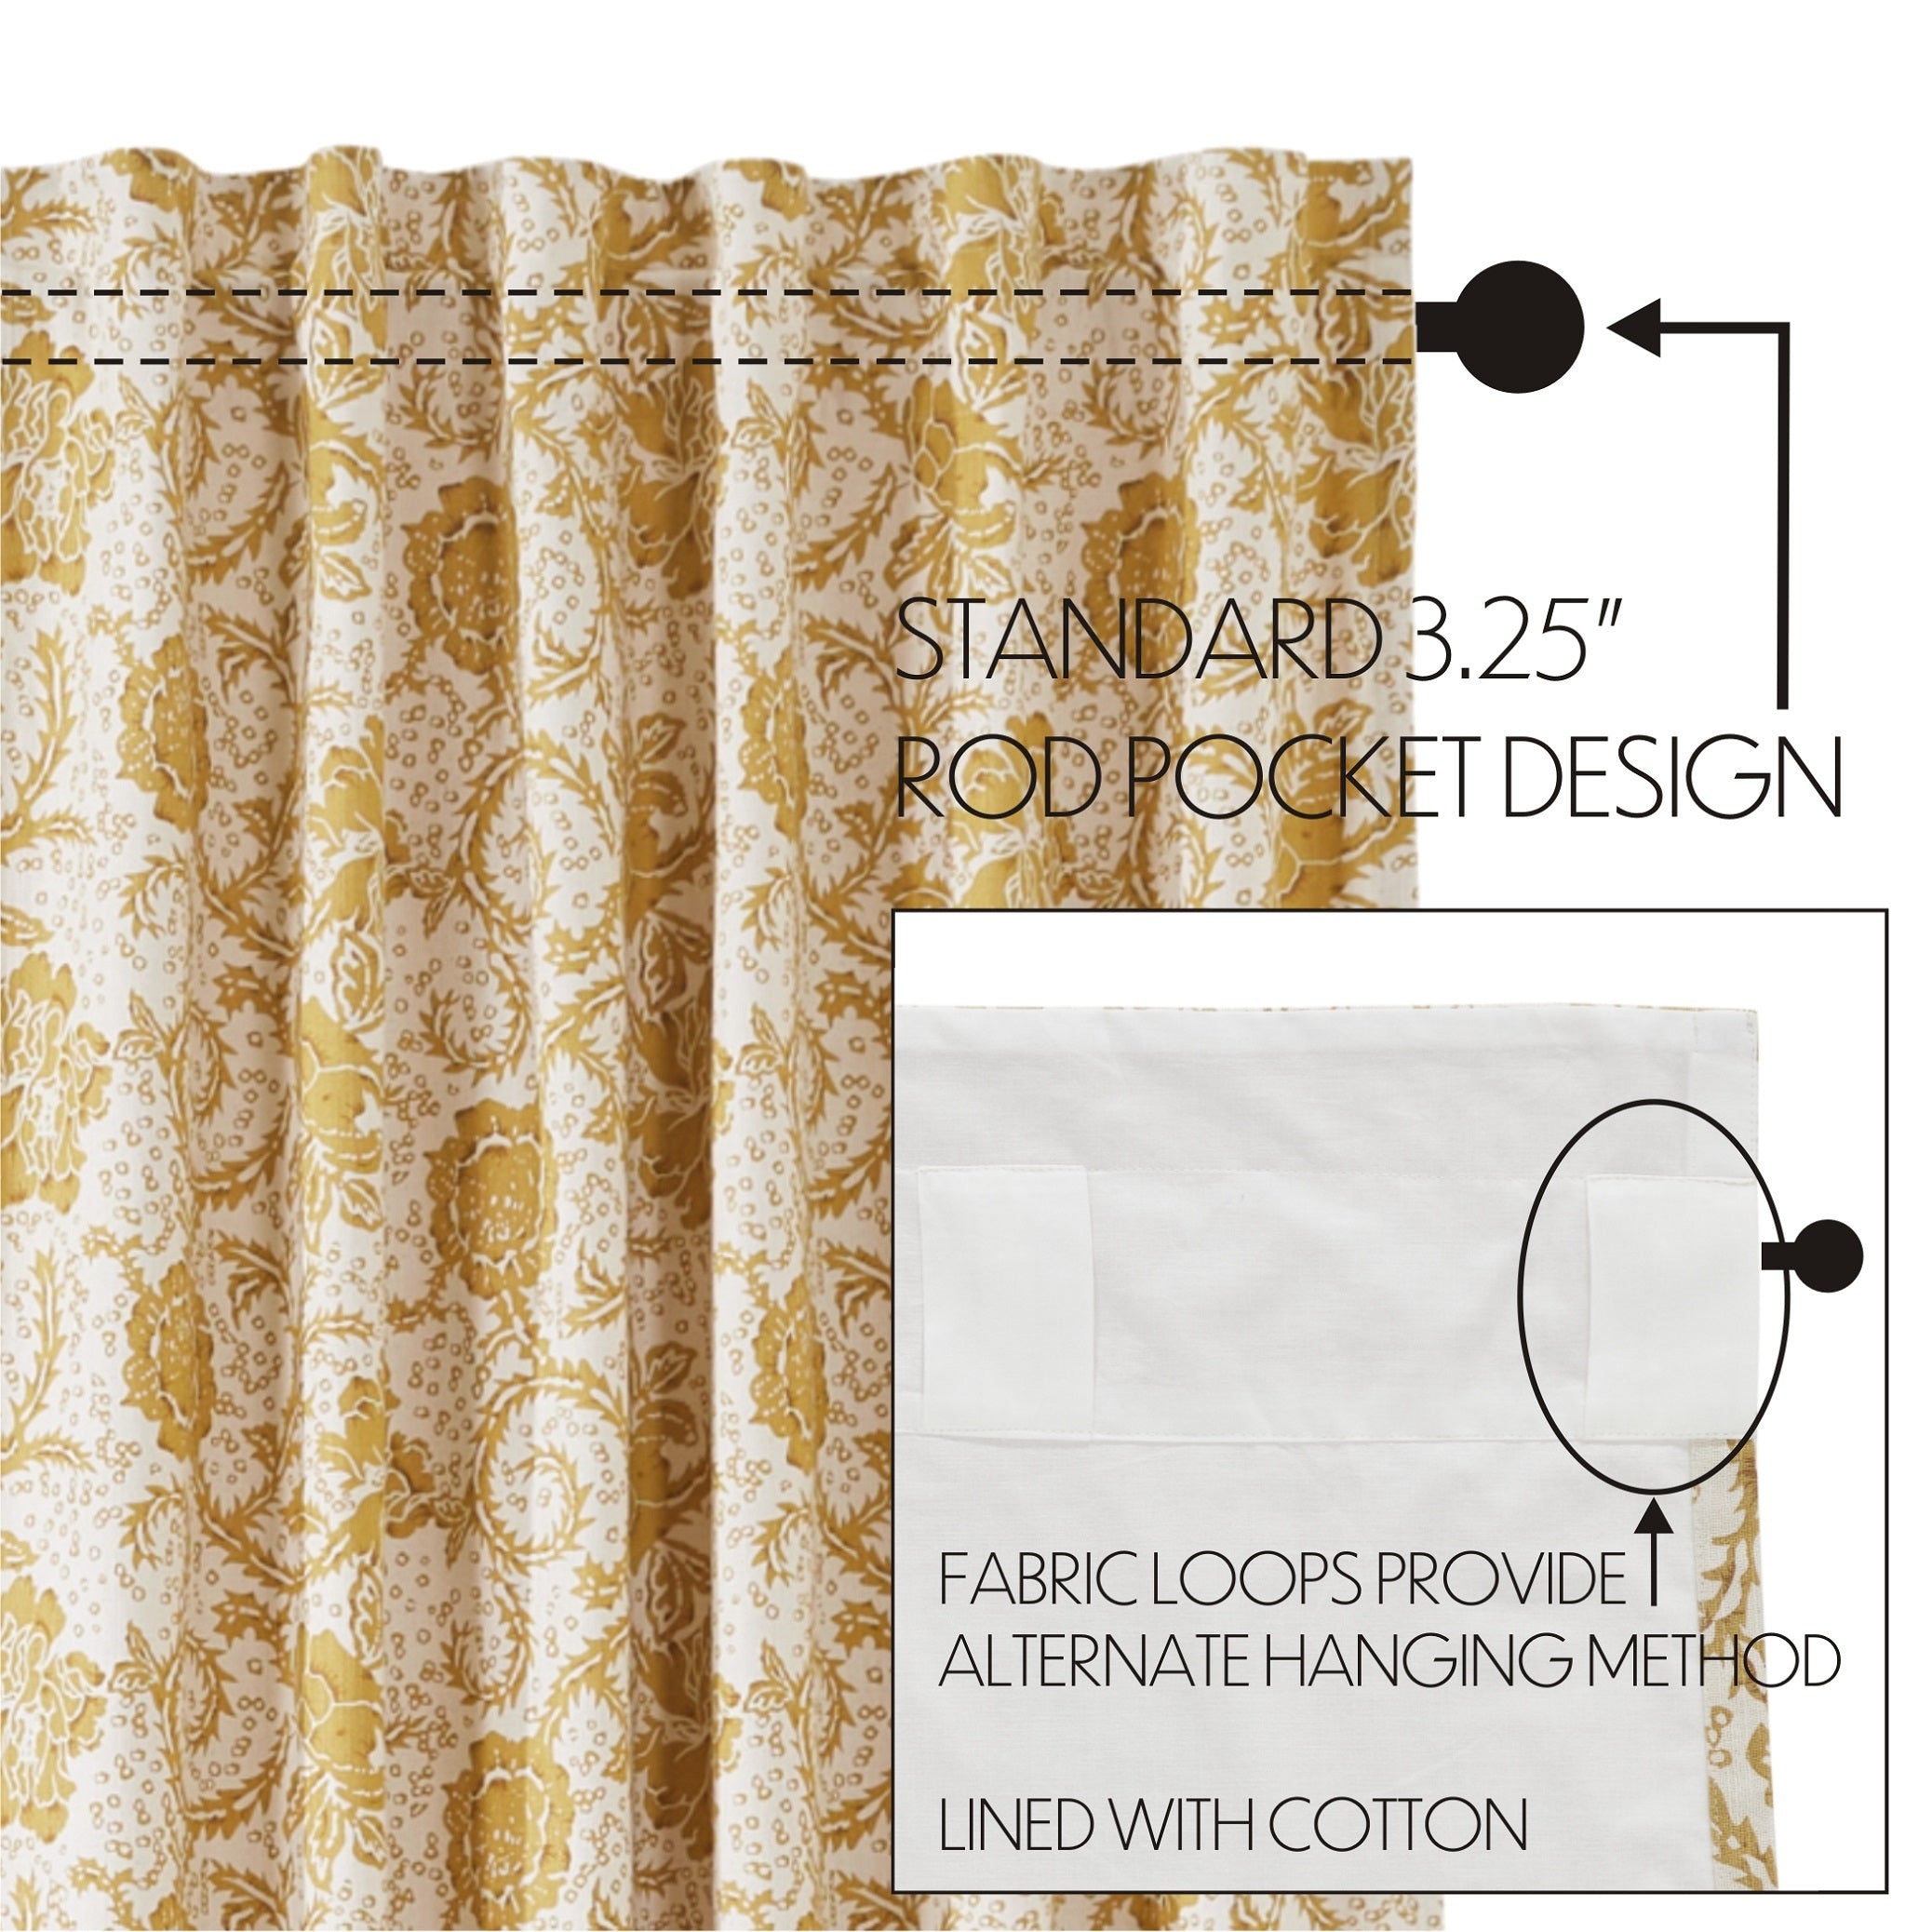 Dorset Gold Floral Tier Curtain Set of 2 L24xW36 VHC Brands